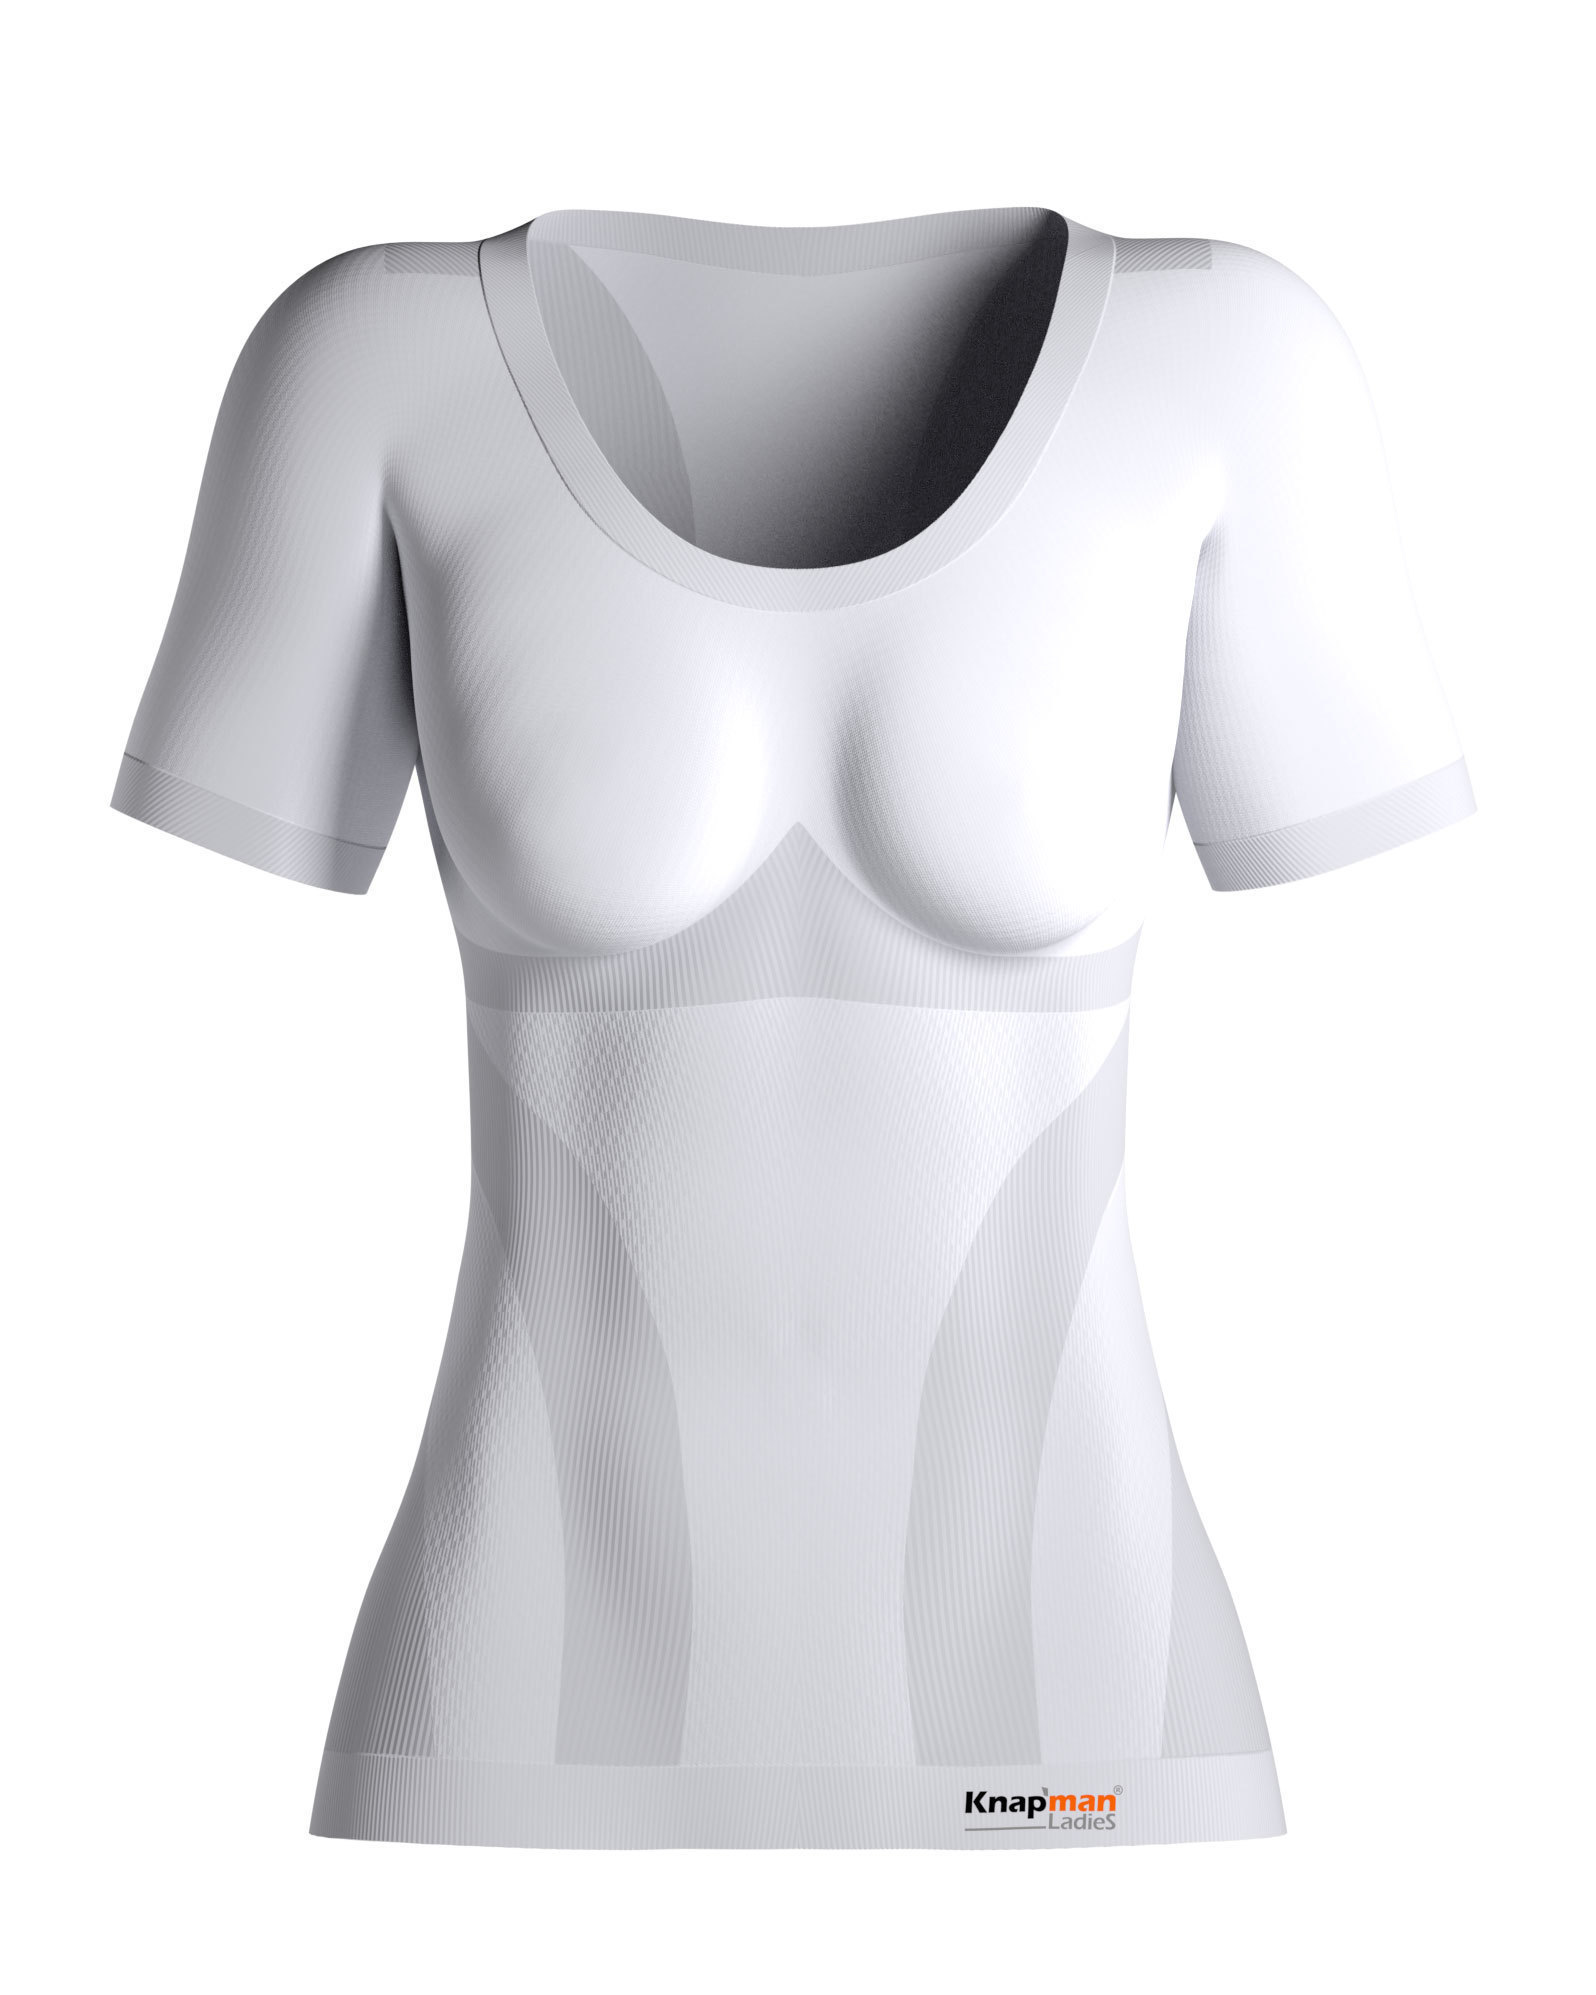 Knapman Women's Zoned Compression Roundneck Invisible Shirt